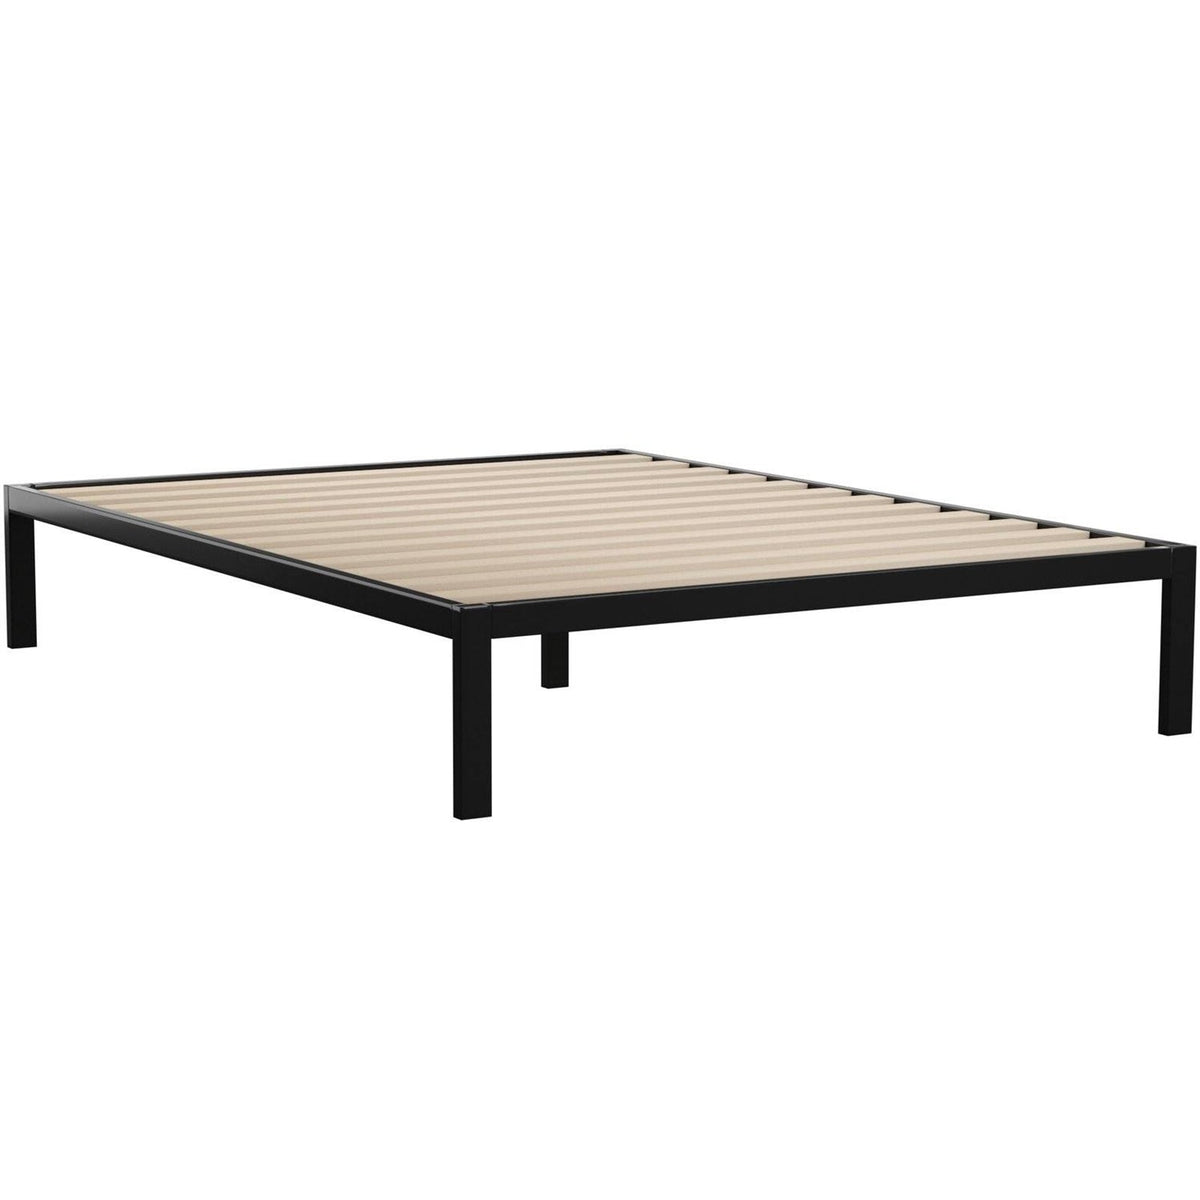 King Black Metal Platform Bed Frame with Wood Slats - 700 lbs Weight Capacity